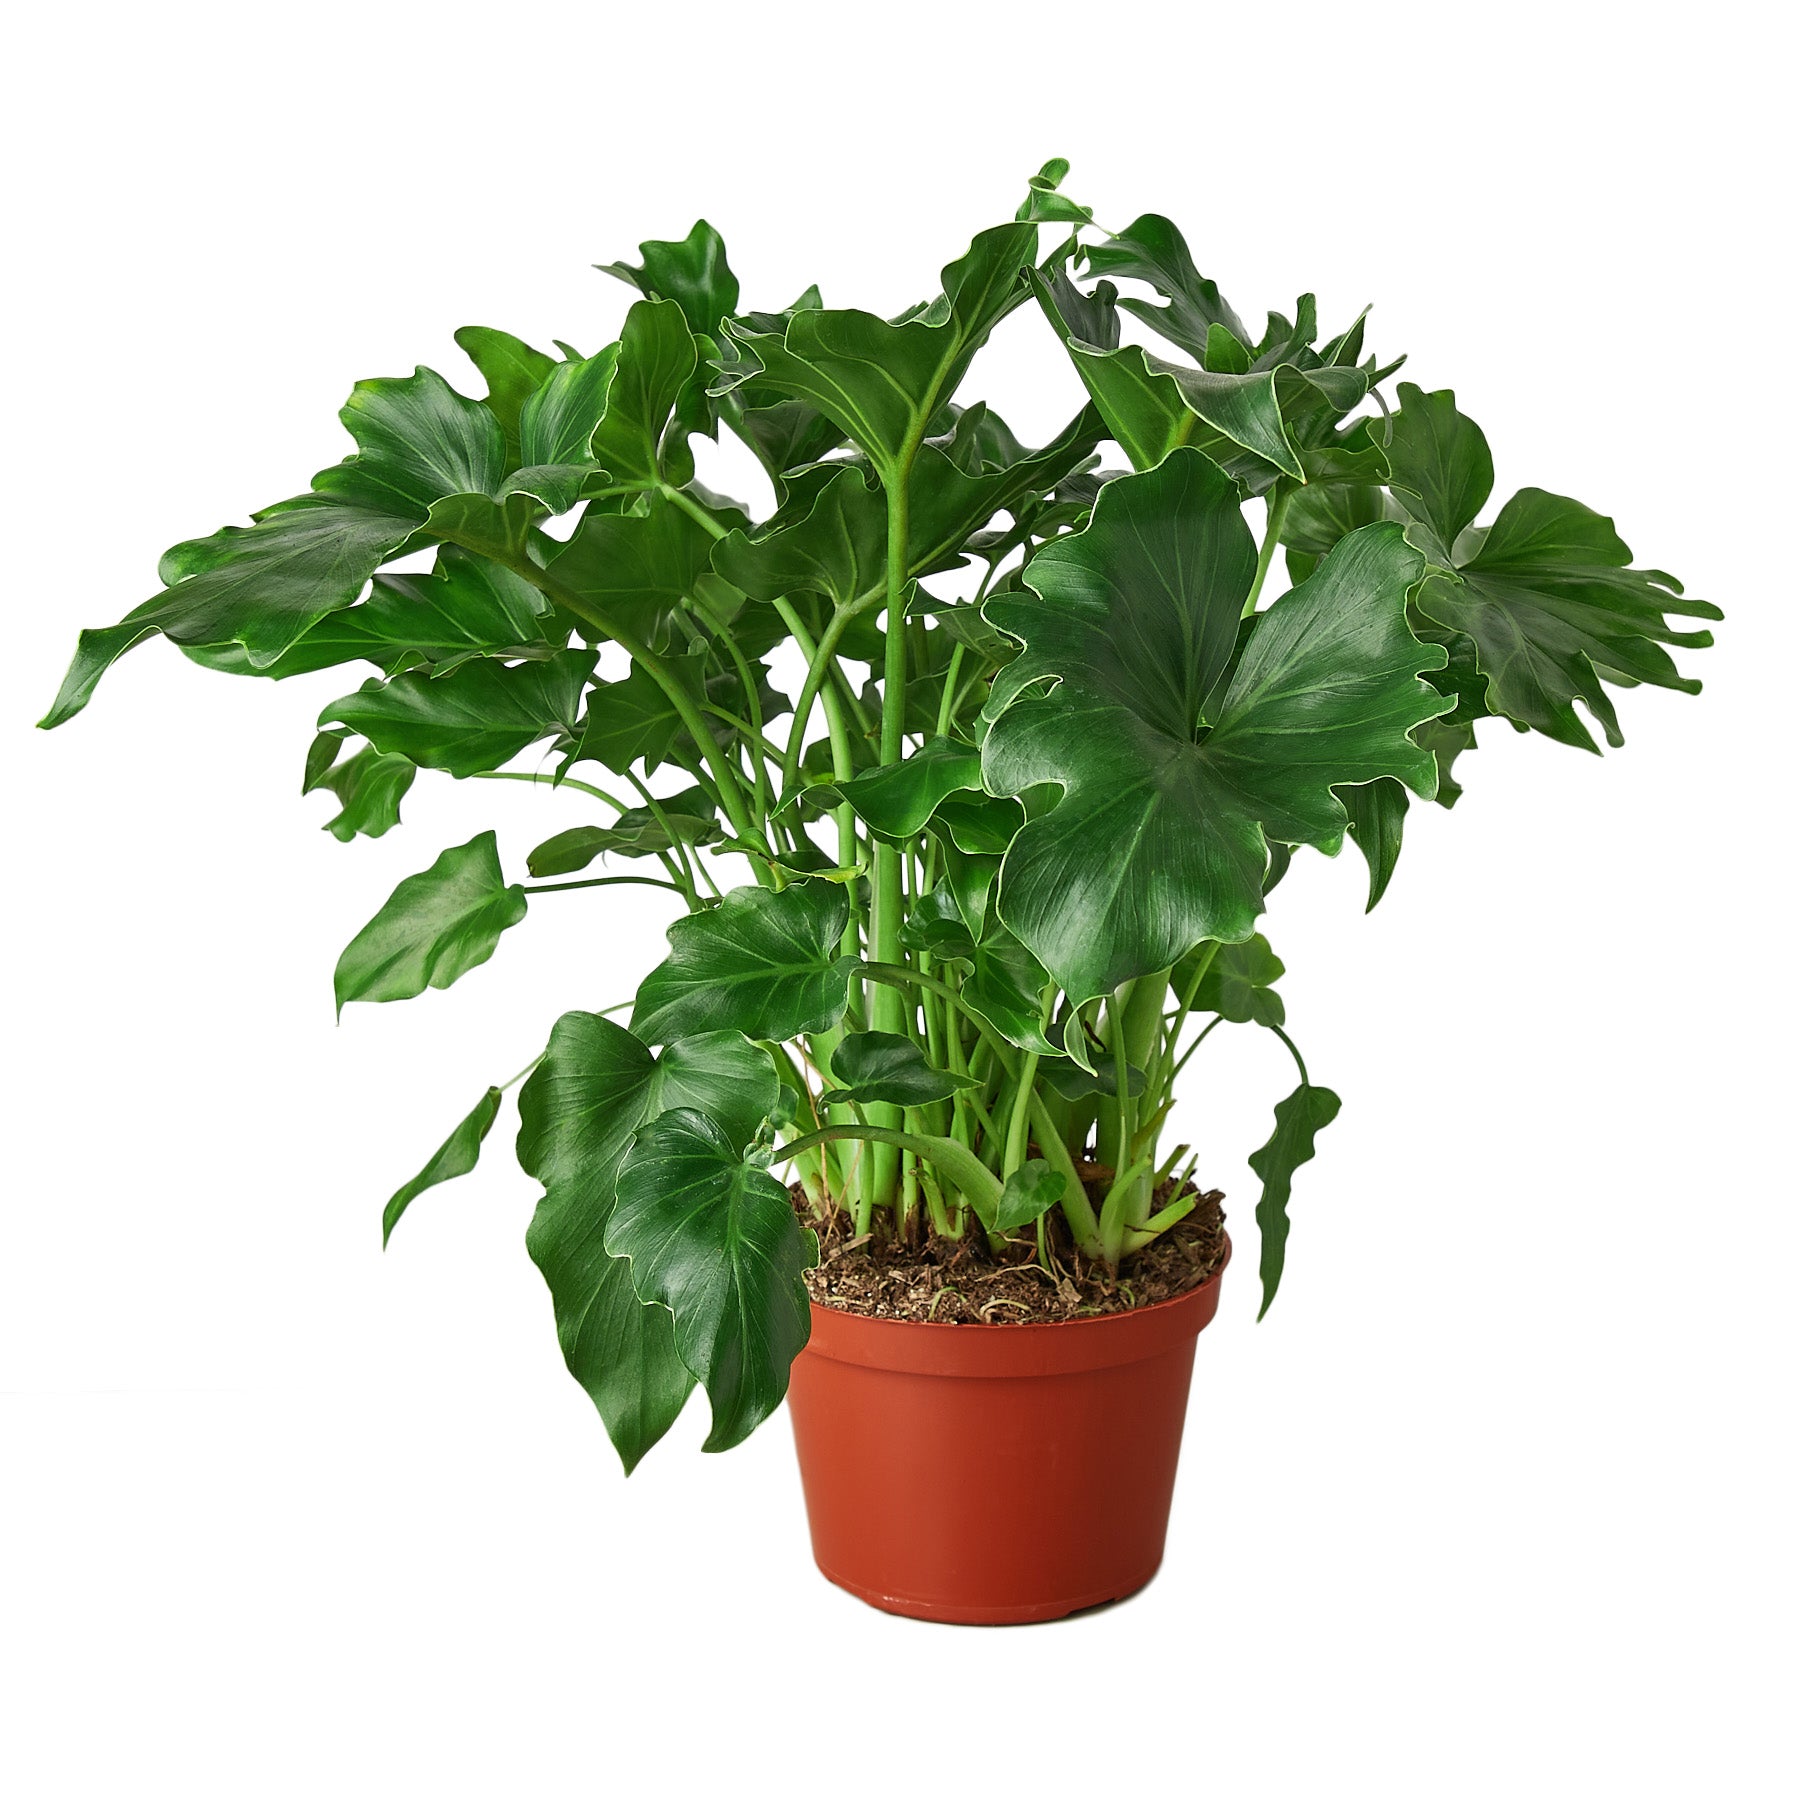 A large plant in a pot on a white background from the best plant nursery near me.